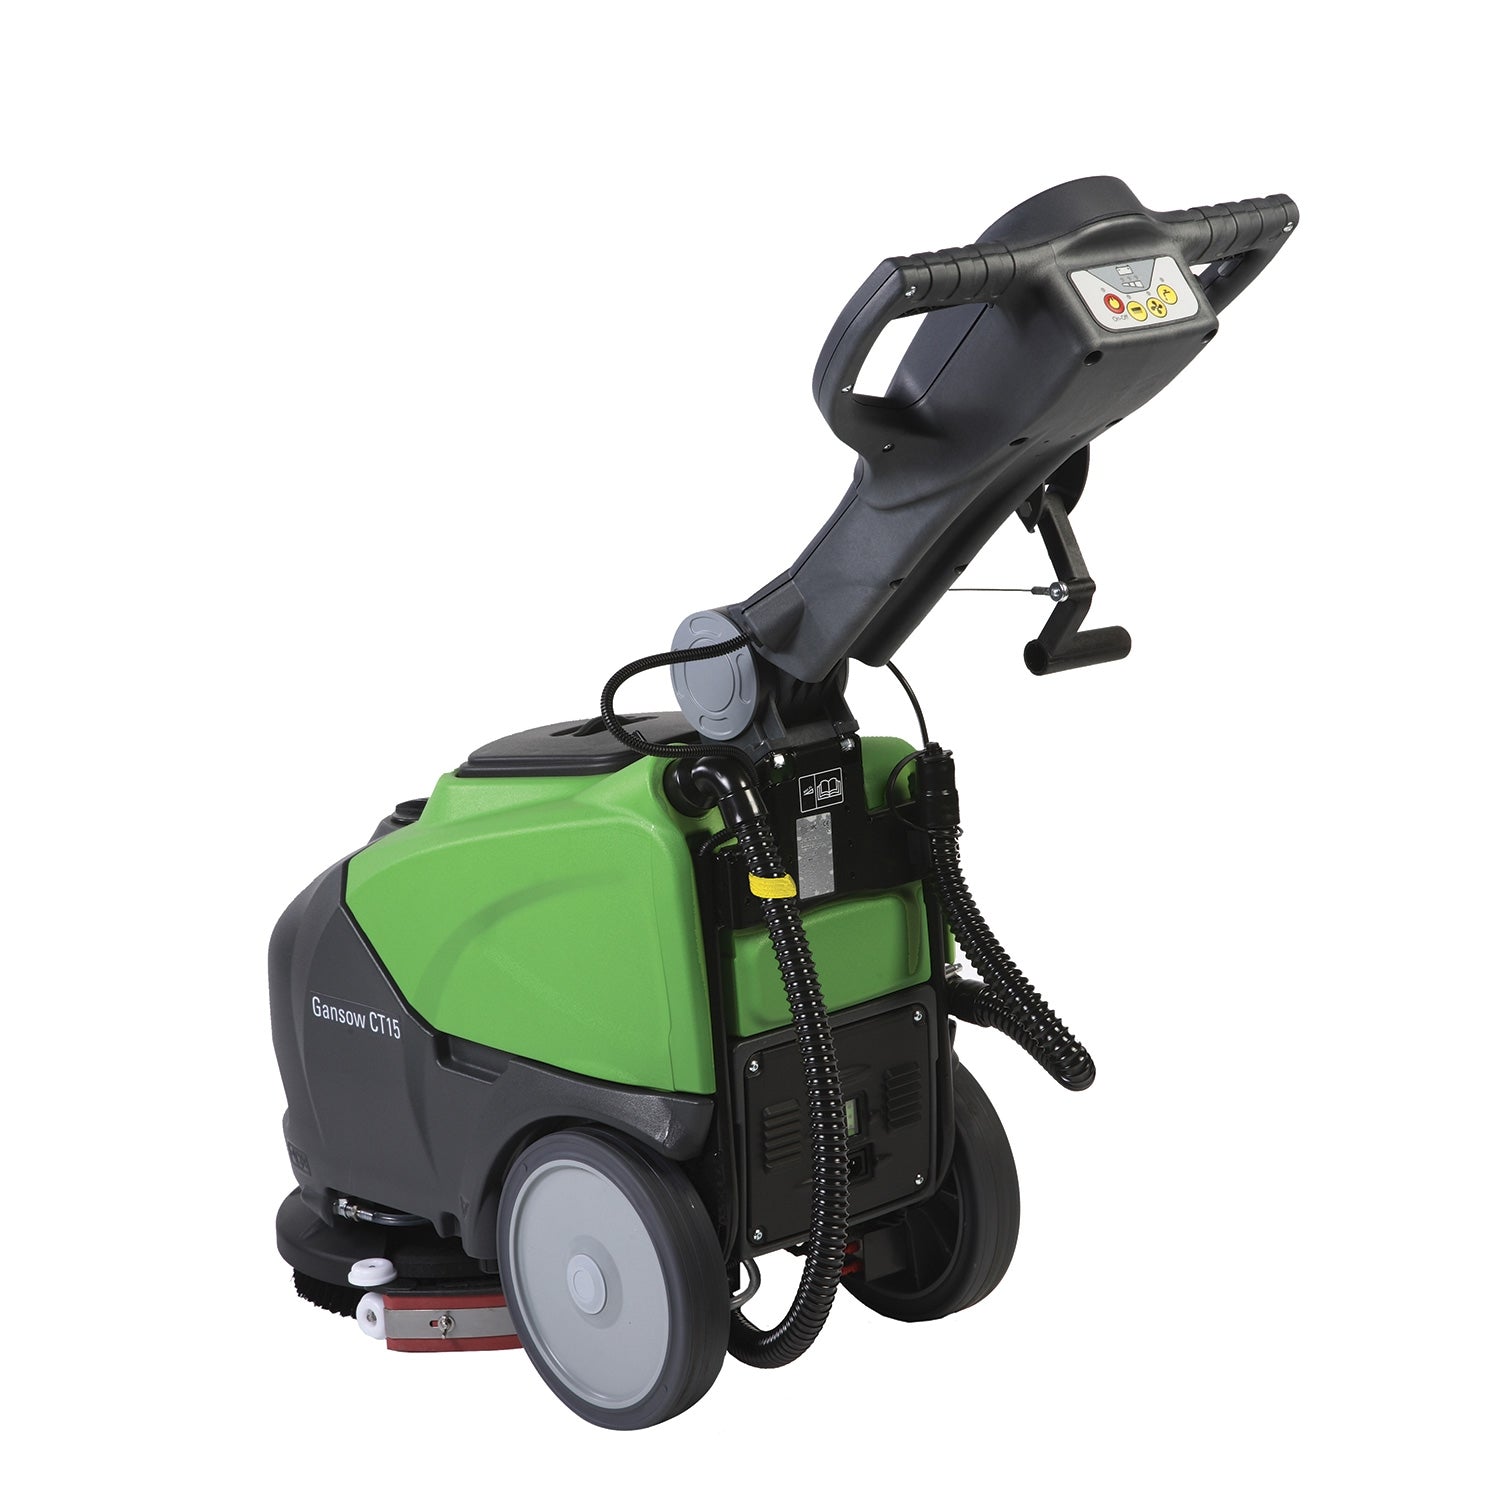 IPC Eagle CT15B35 14" Battery Powered Automatic Floor Scrubber